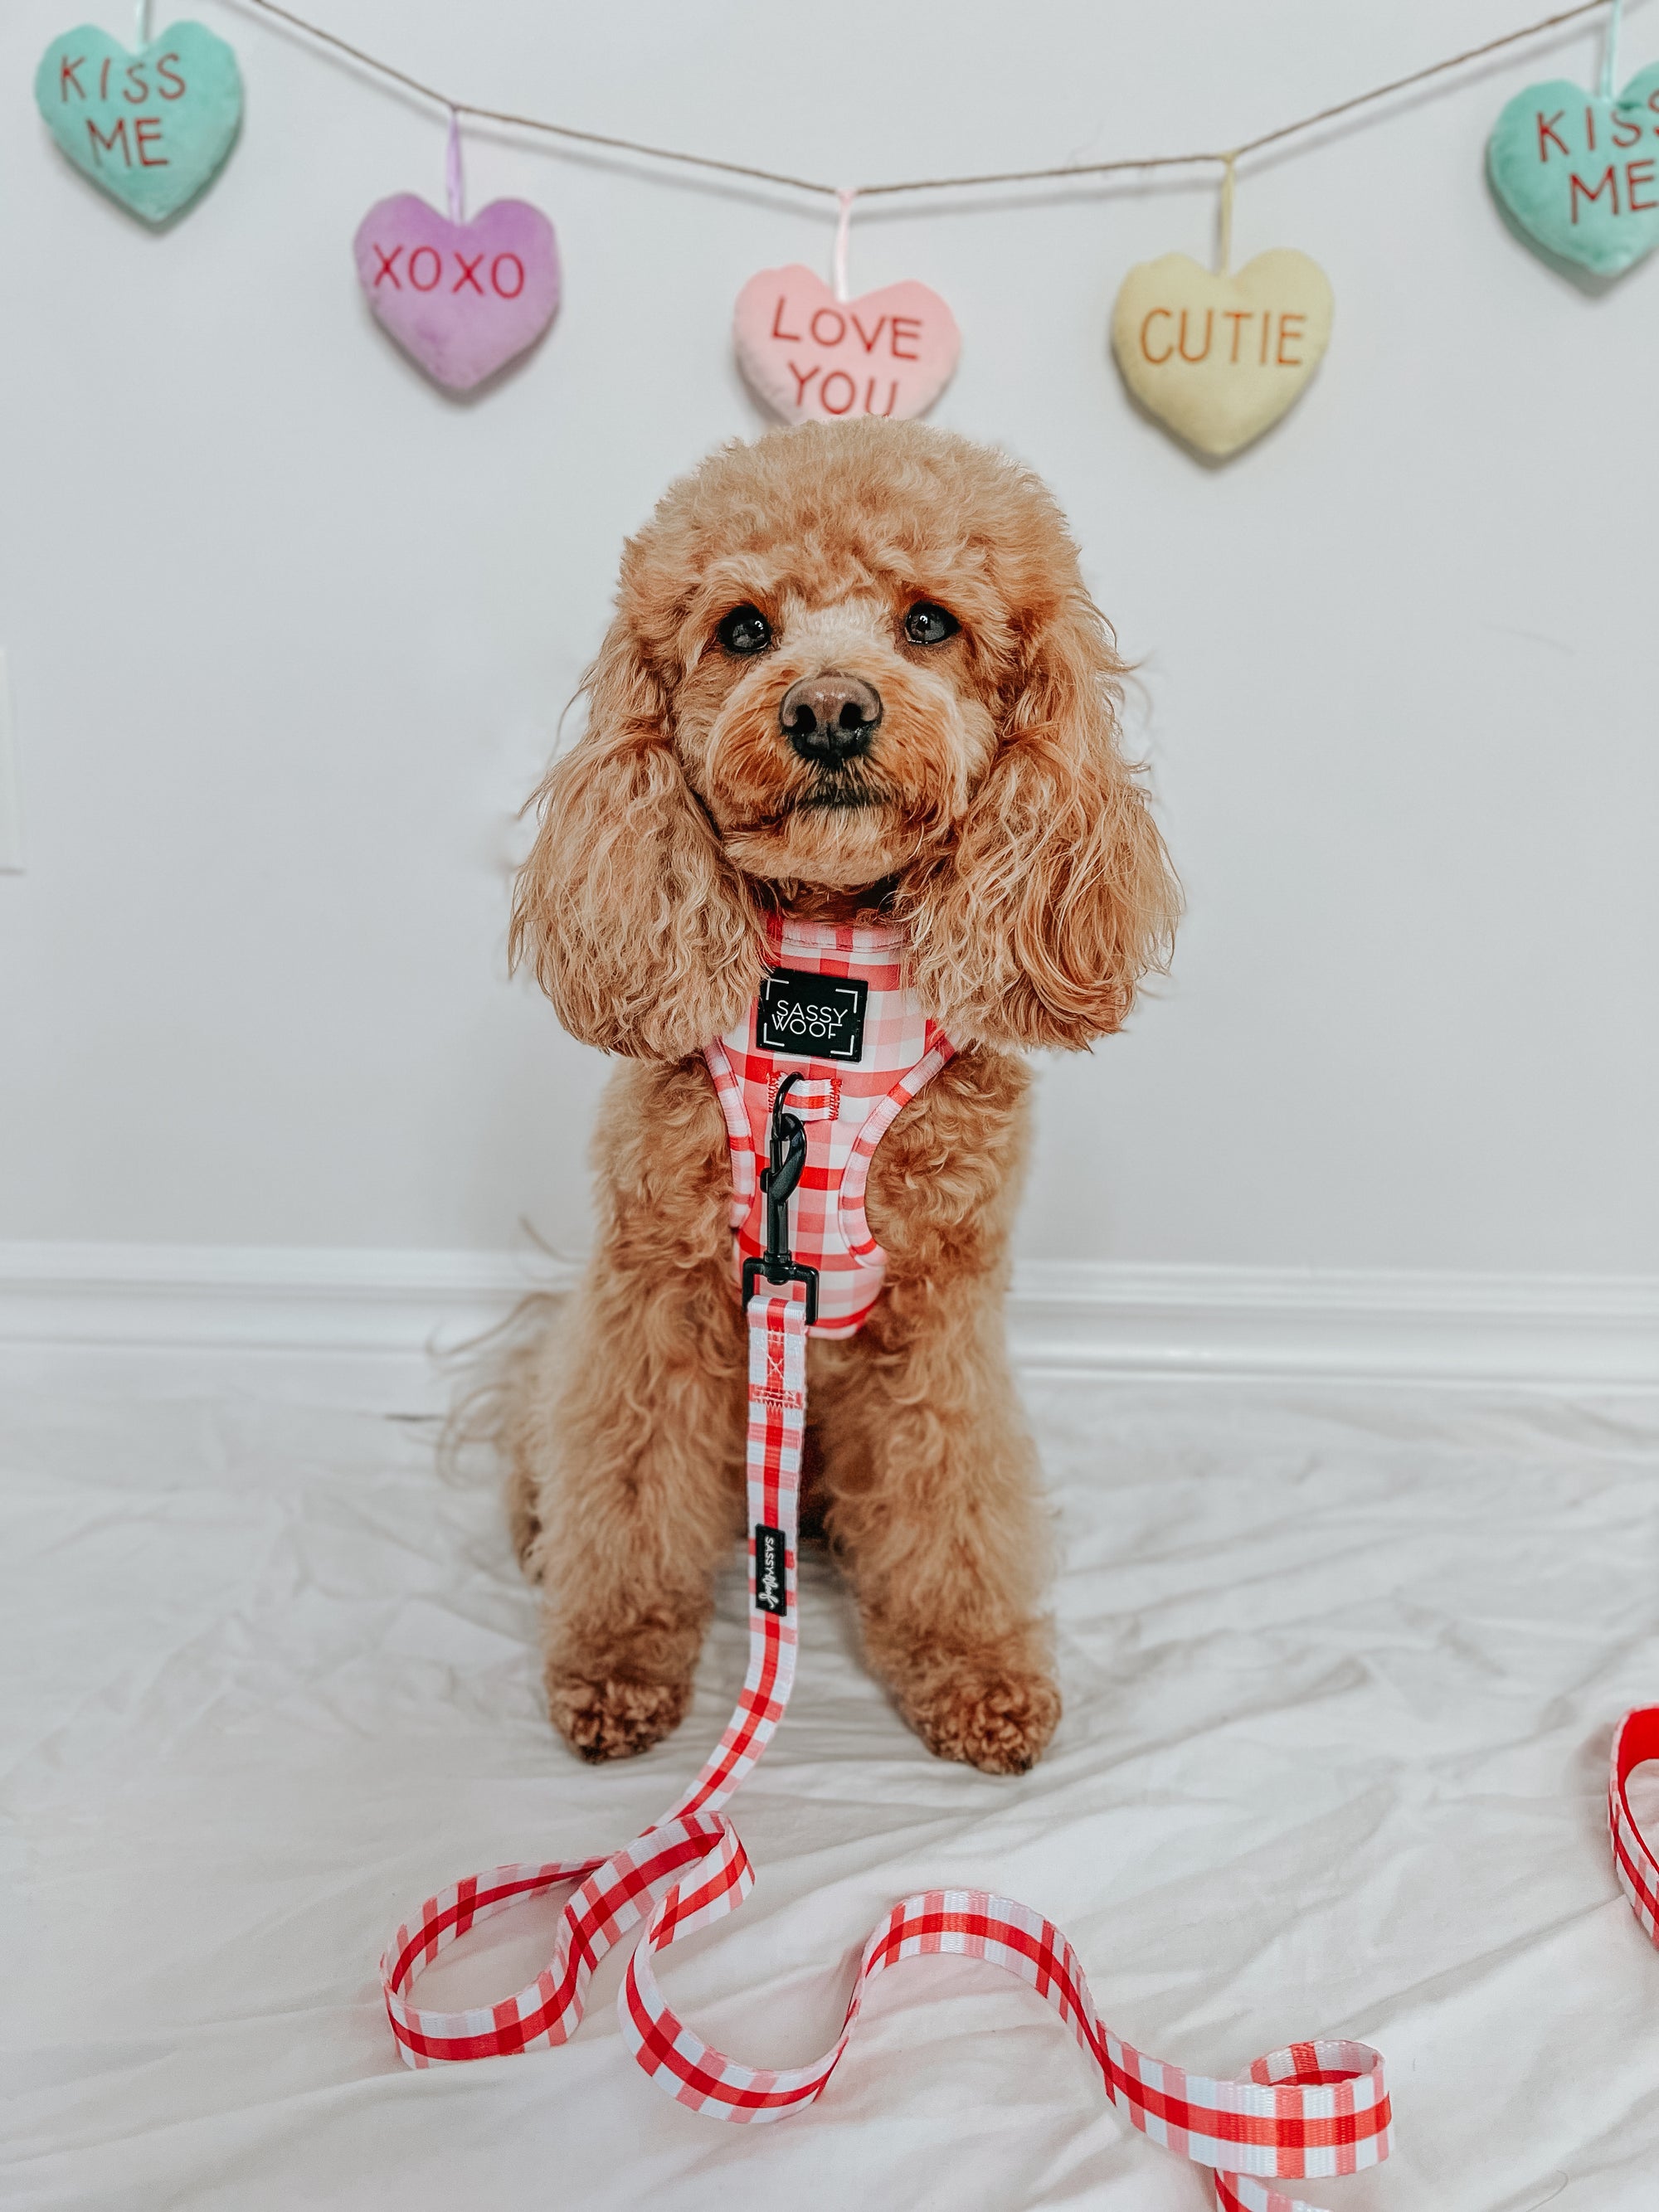 INFLUENCER_CONTENT | @GEORGIE.THECAVAPOO | SIZE XS